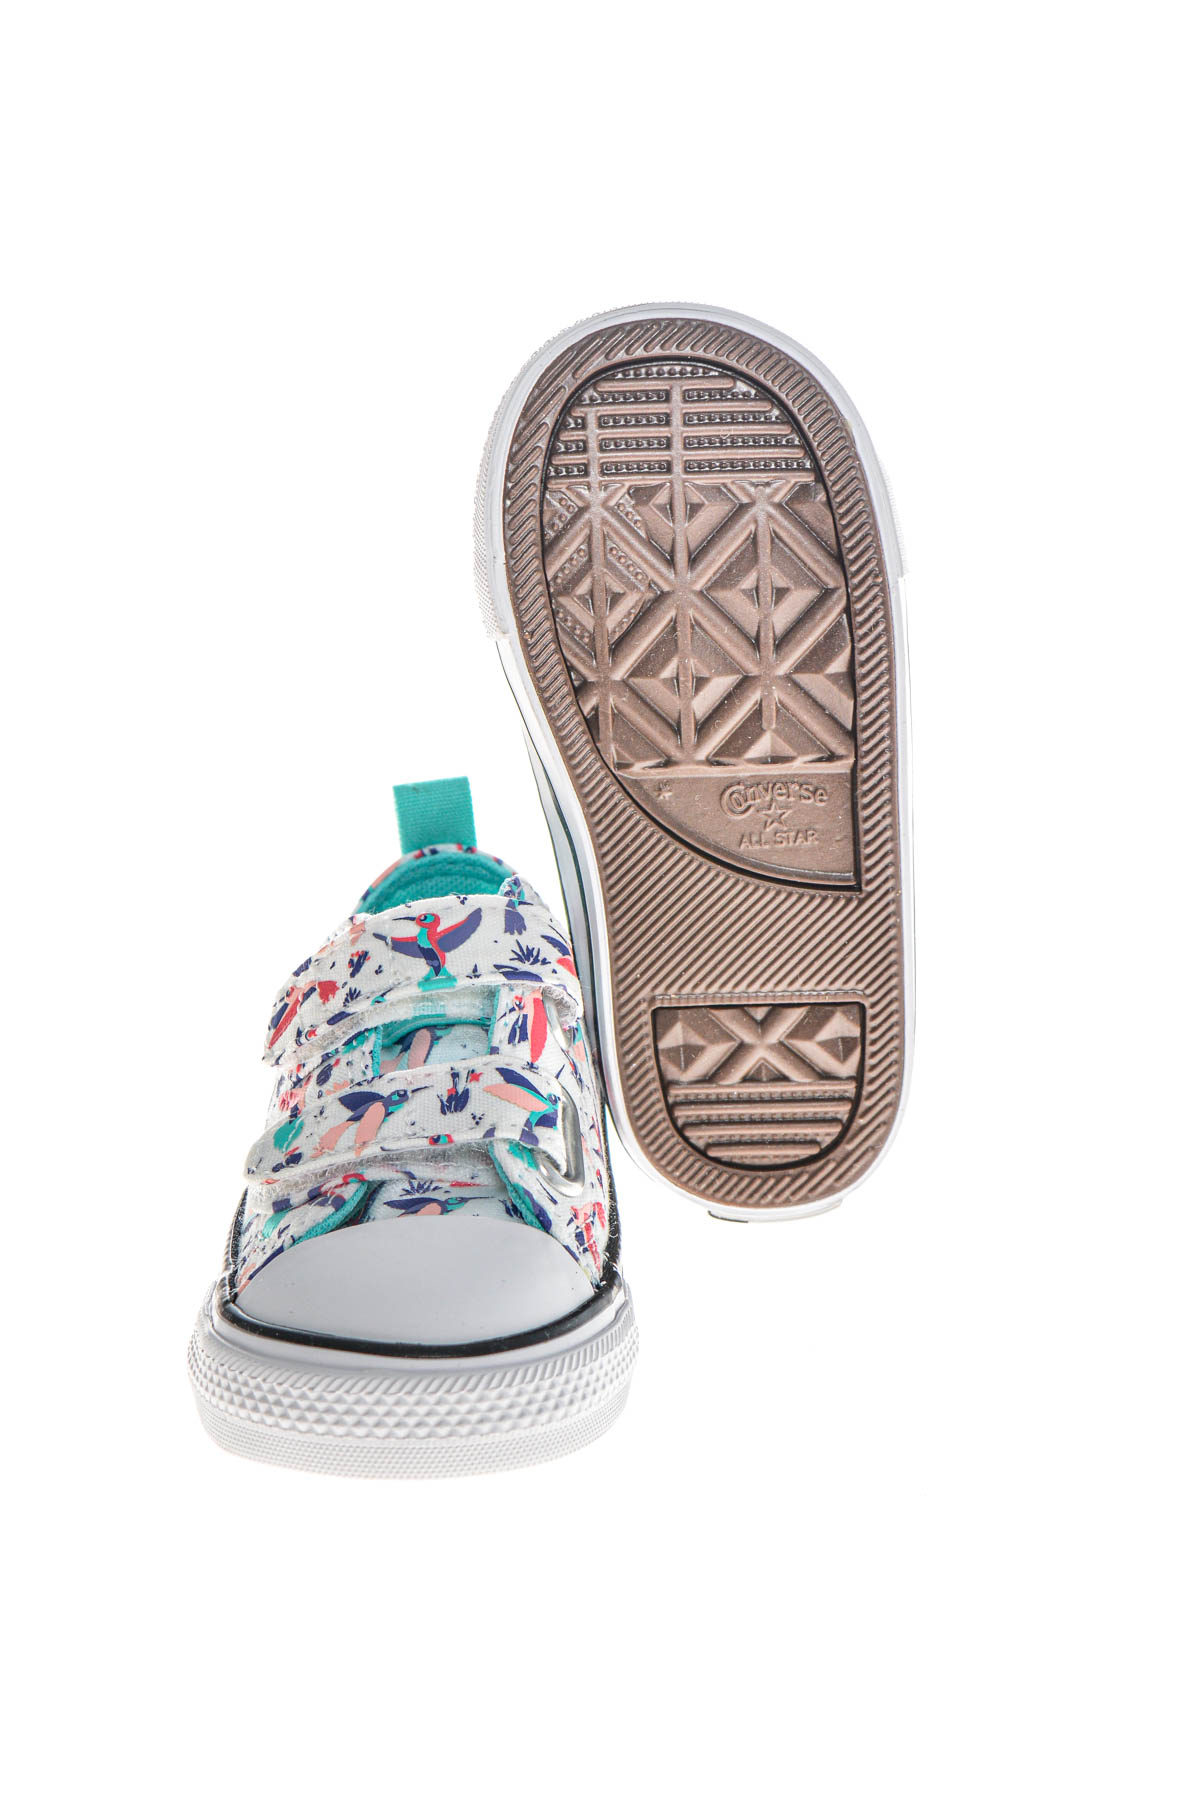 Sneakers for girls - Converse - 3